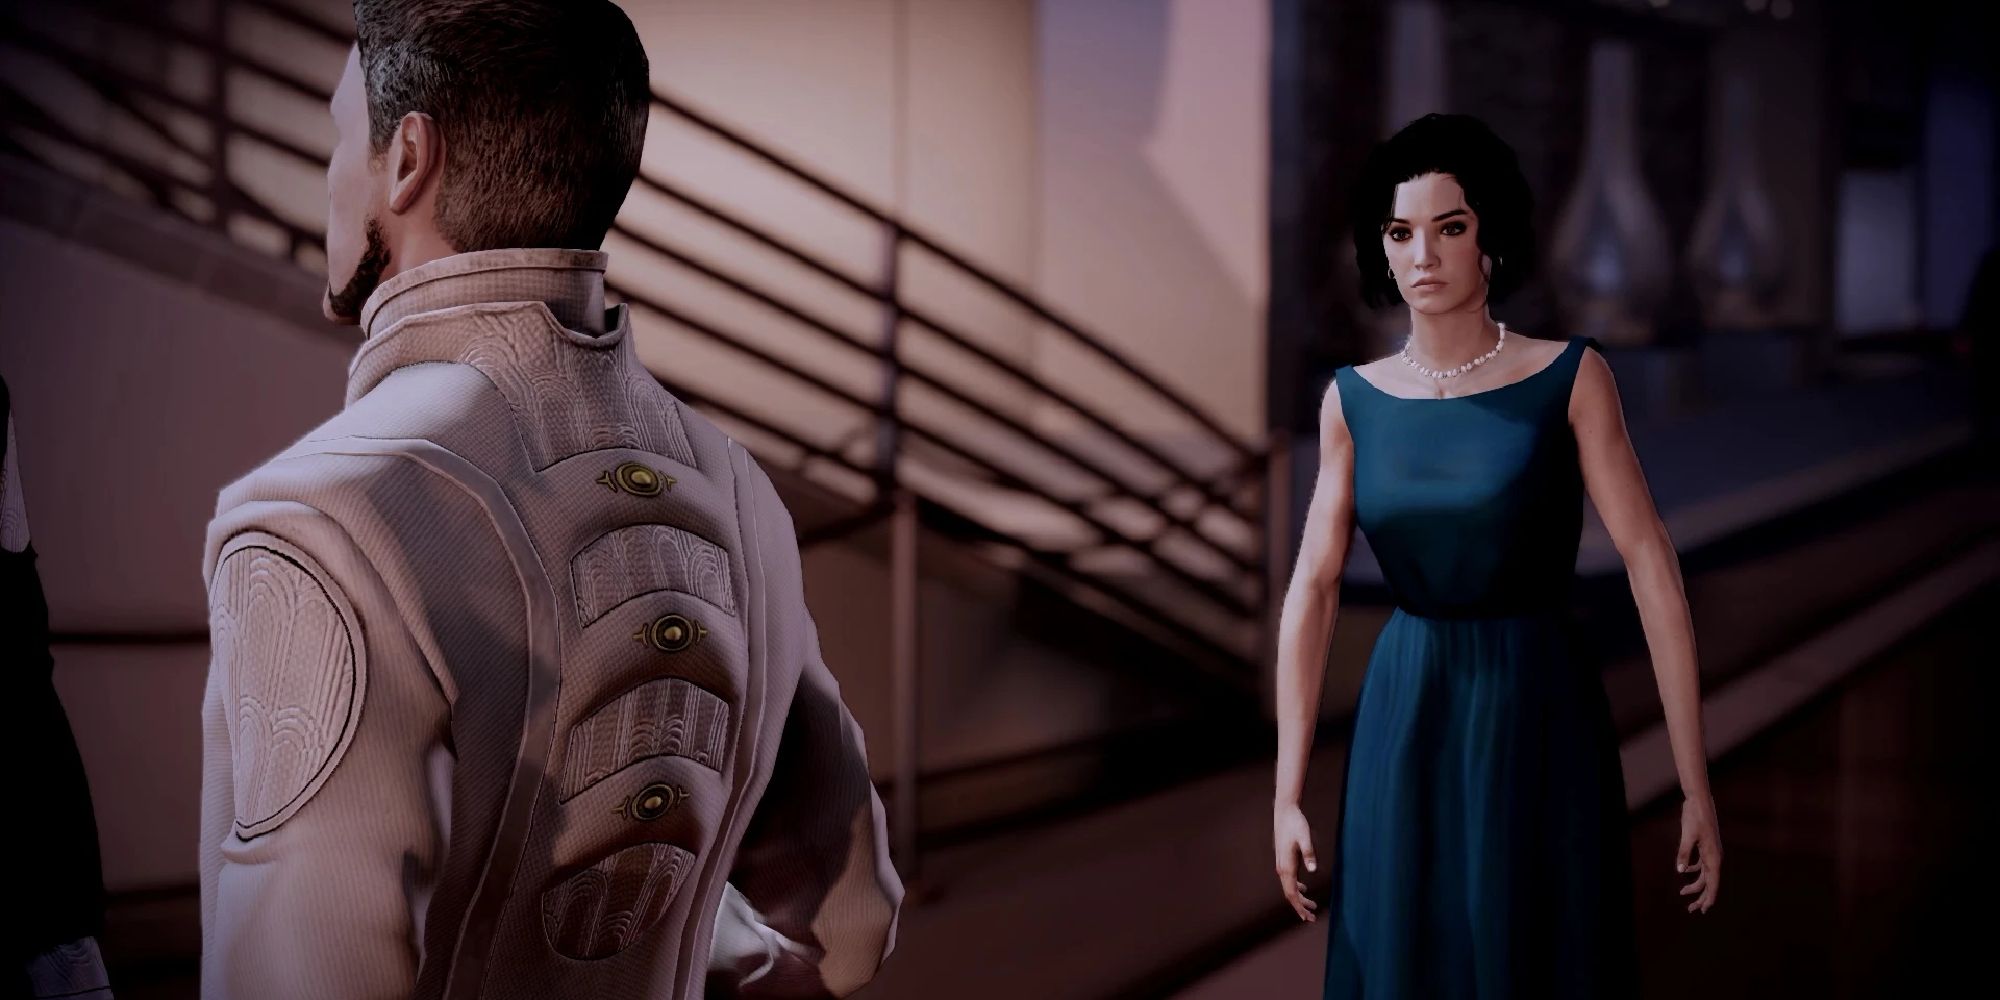 Shepard in Kasumi's DLC mission in Mass Effect 2, dressed in a vintage style gown.